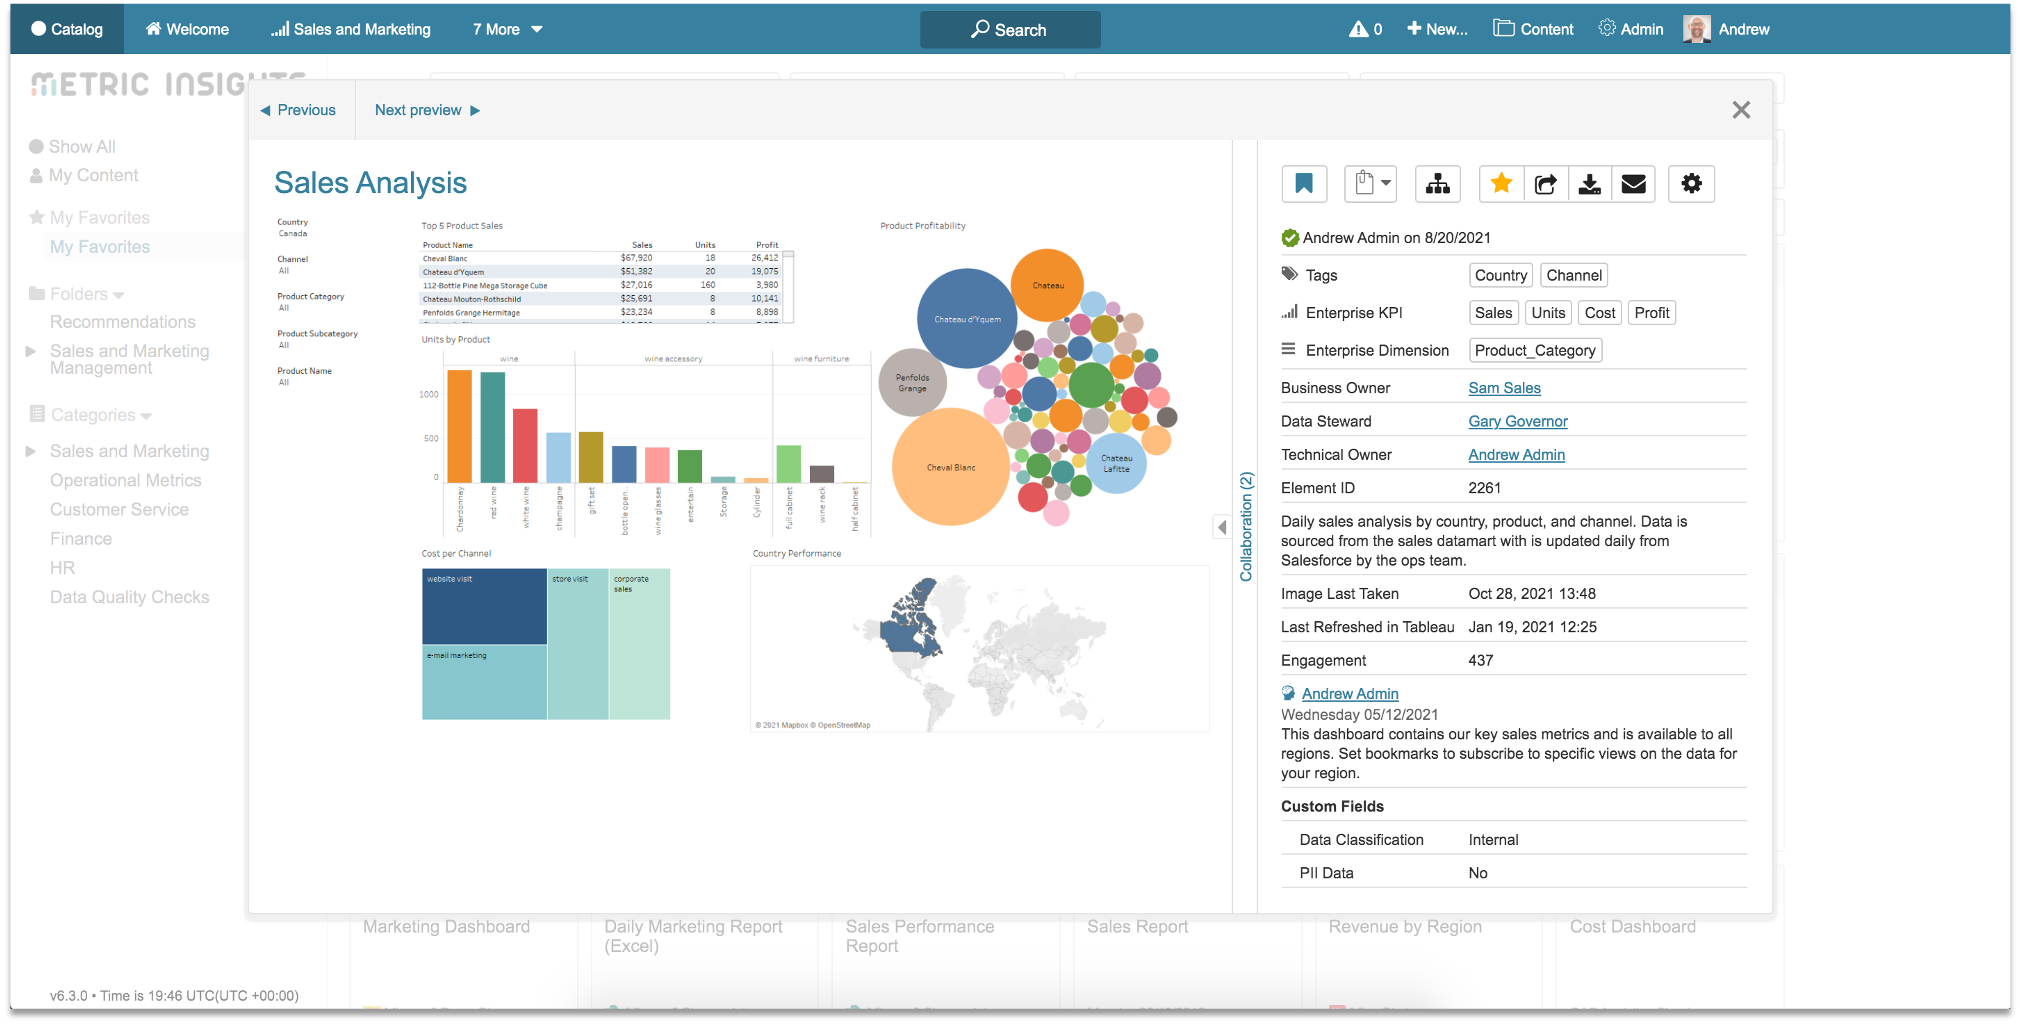 Tableau Sales Analysis Dashboard within Metric Insights